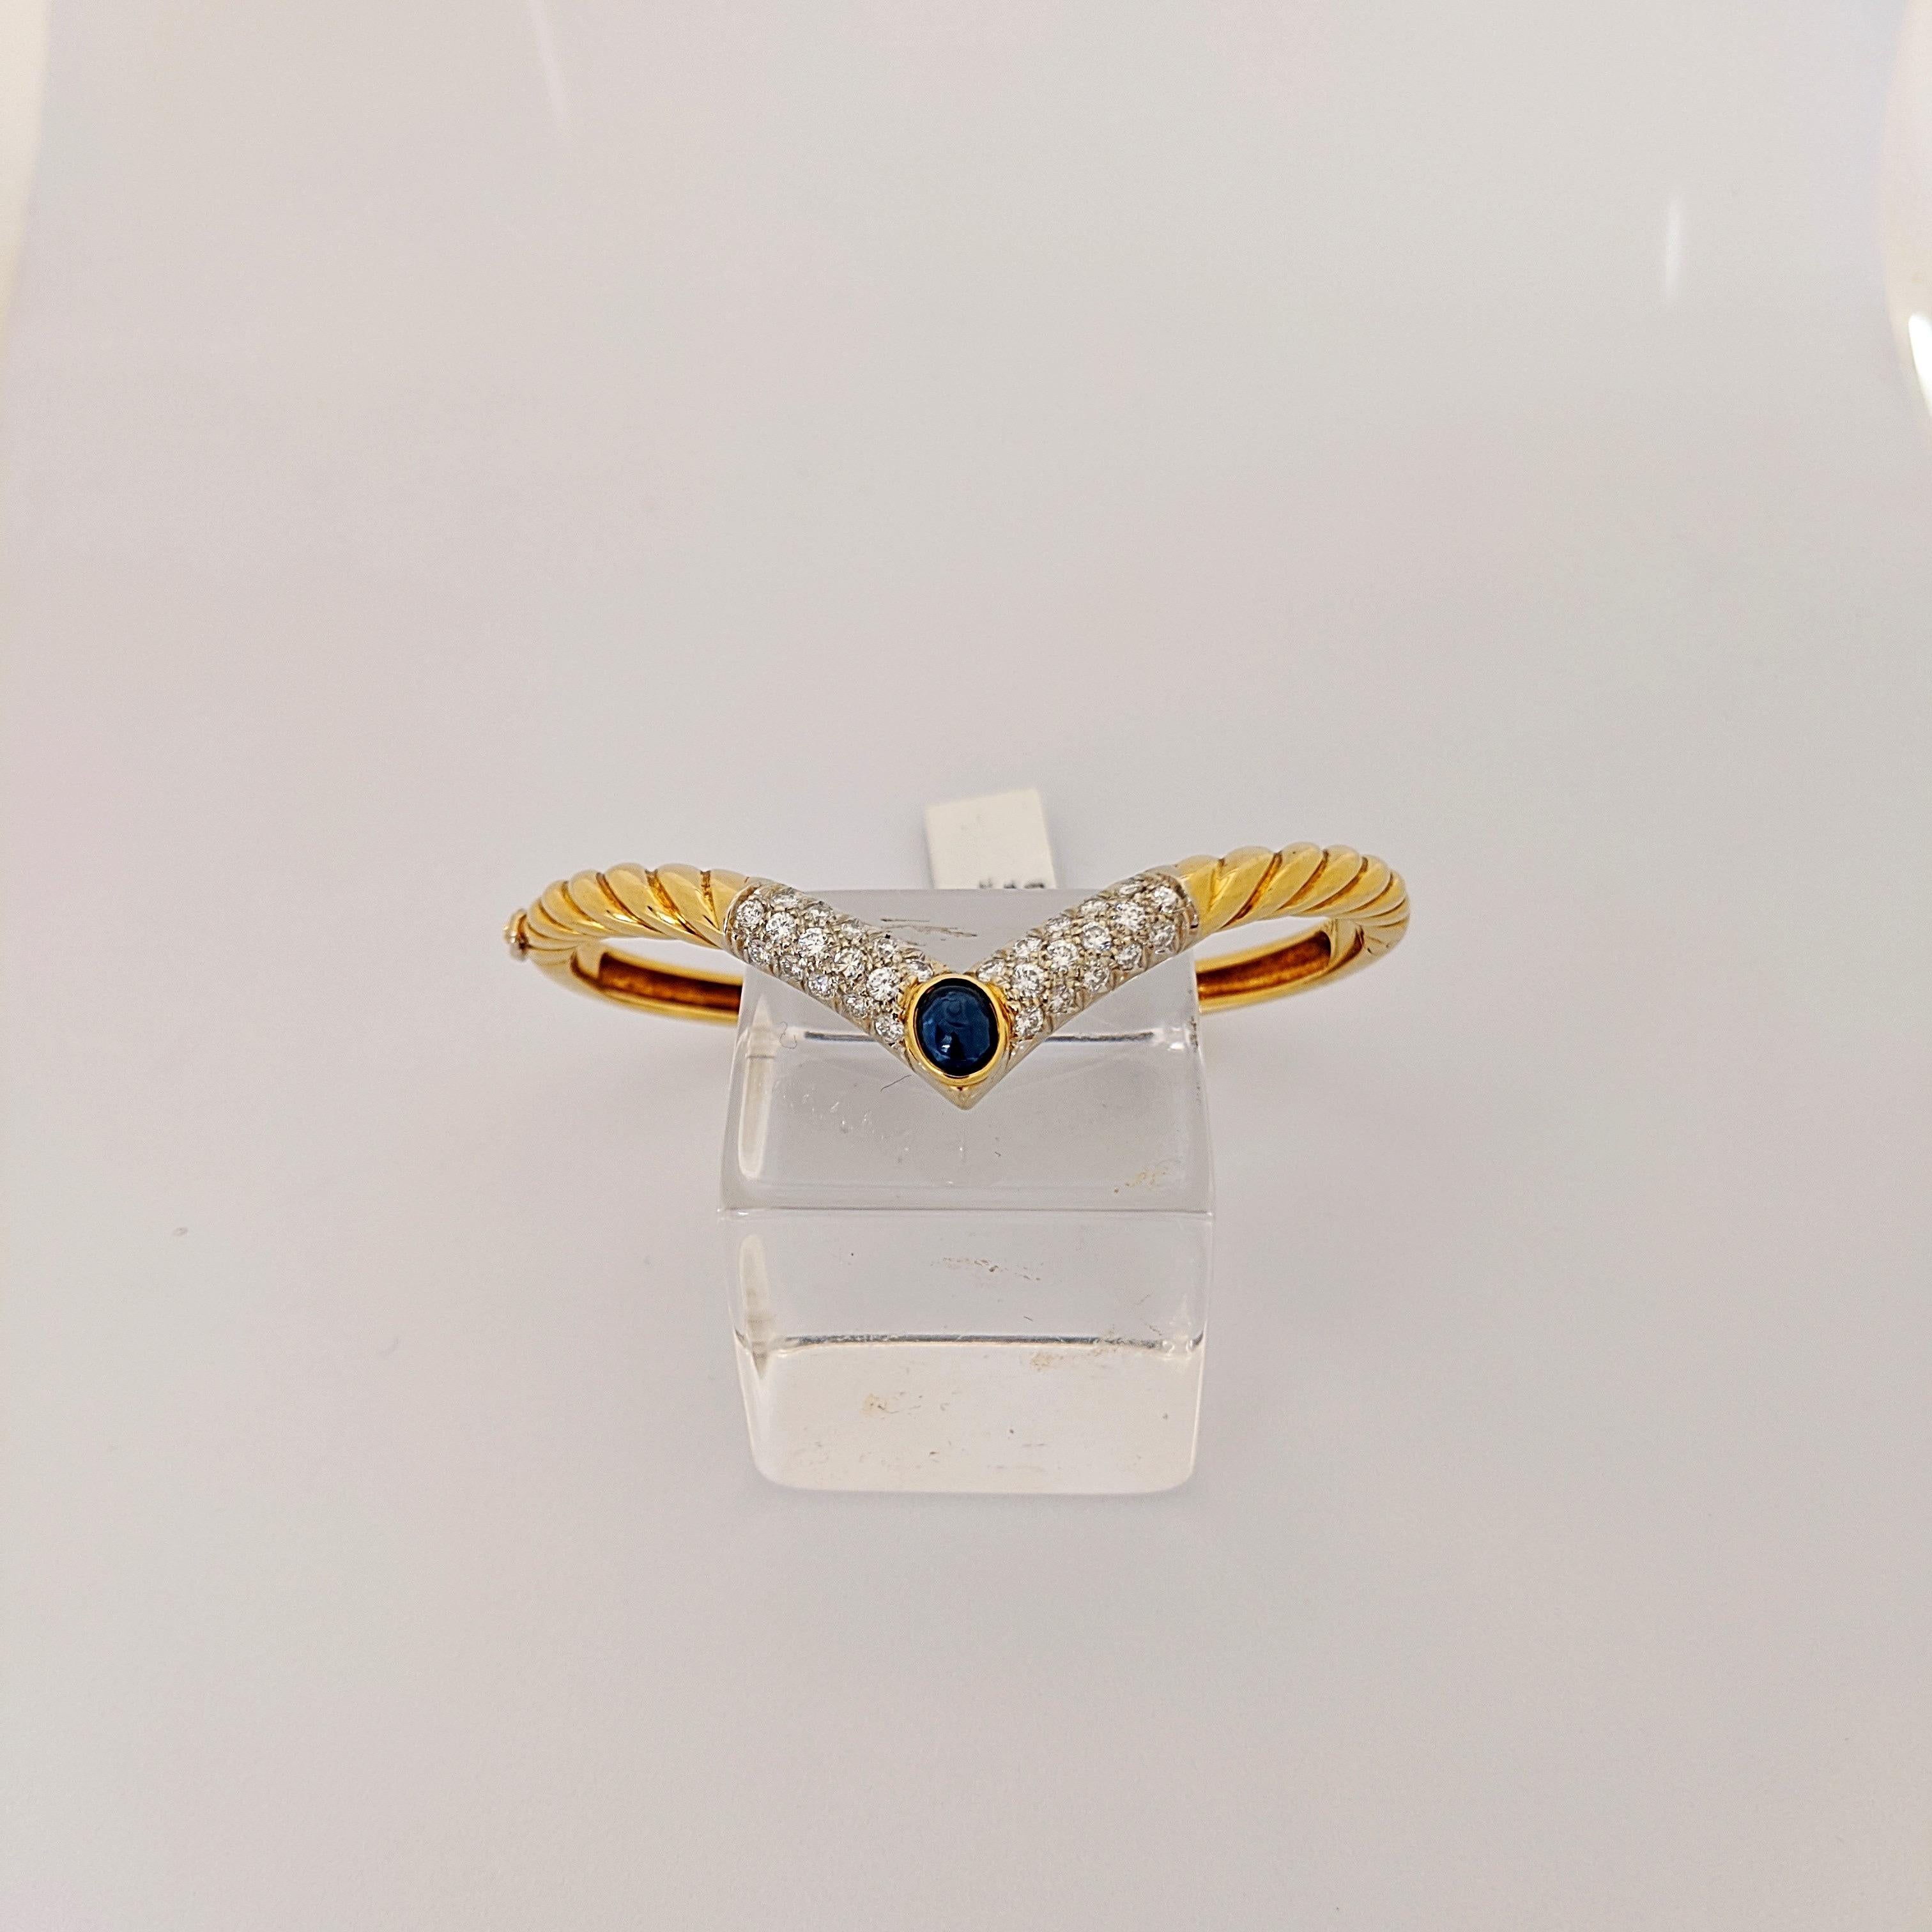 18KT Yellow Gold Bangle Bracelet with 1.26CT. Diamonds & 1.Ct. Cabochon Sapphire In New Condition For Sale In New York, NY